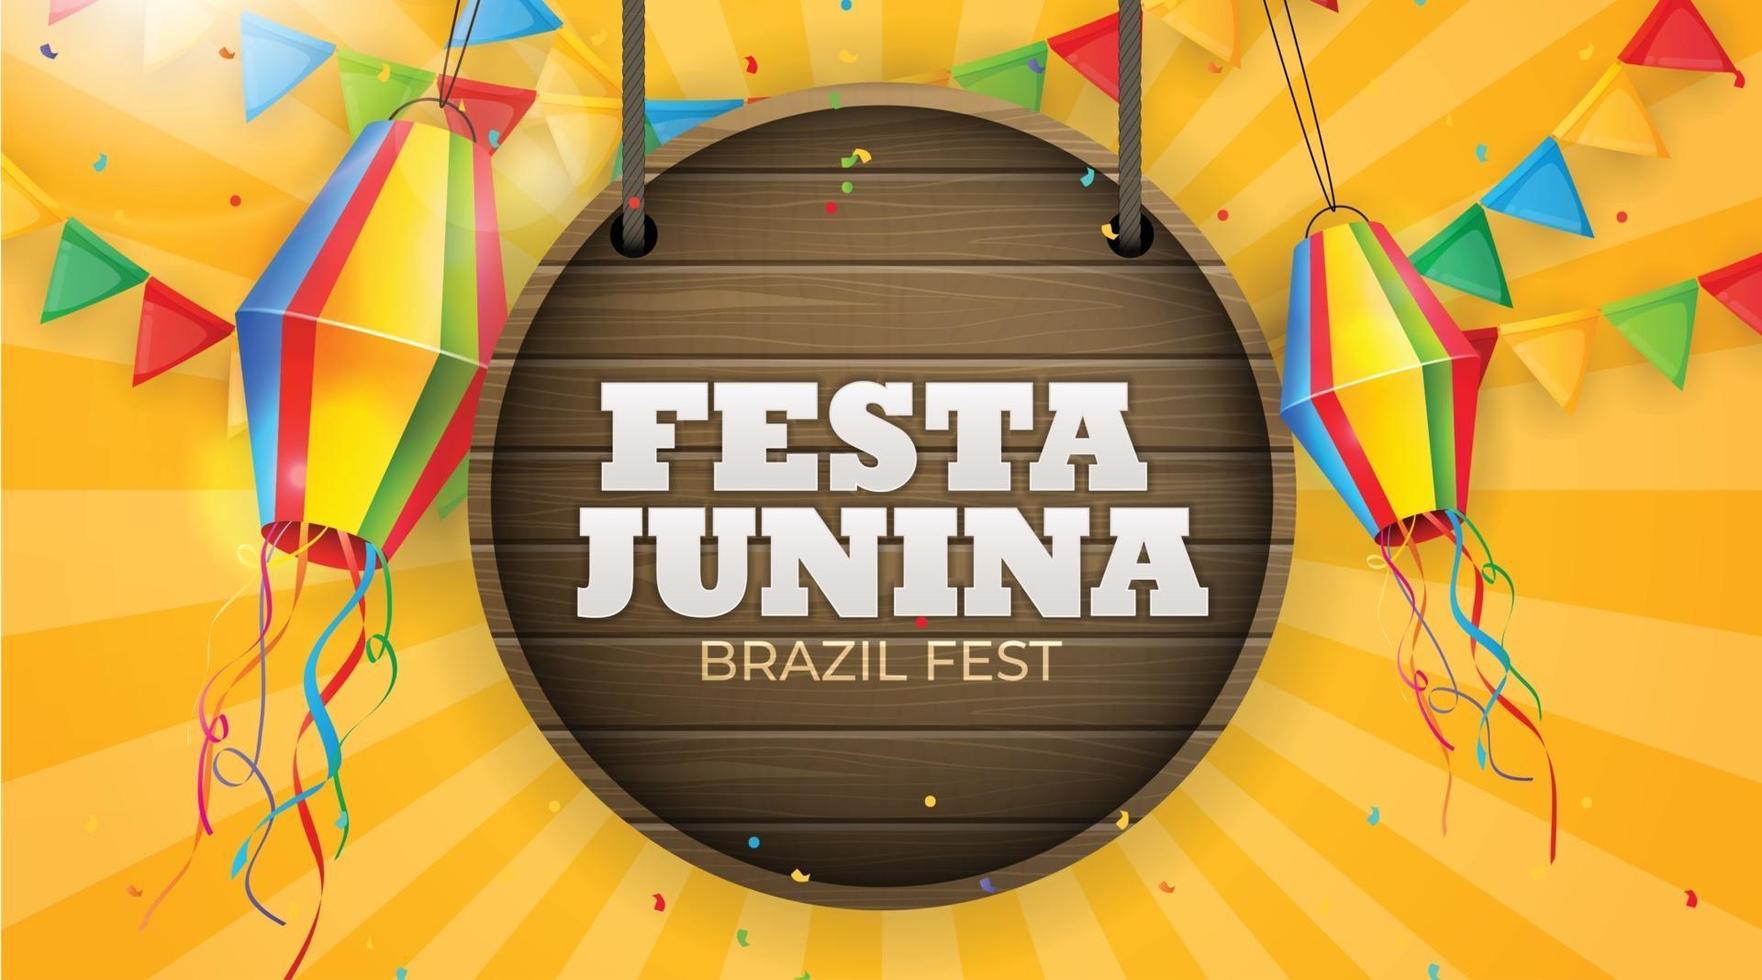 Festa Junina Background with Party Flags, Lantern. Brazil June Festival  Background for Greeting Card, Invitation on Holiday. Vector Illustration